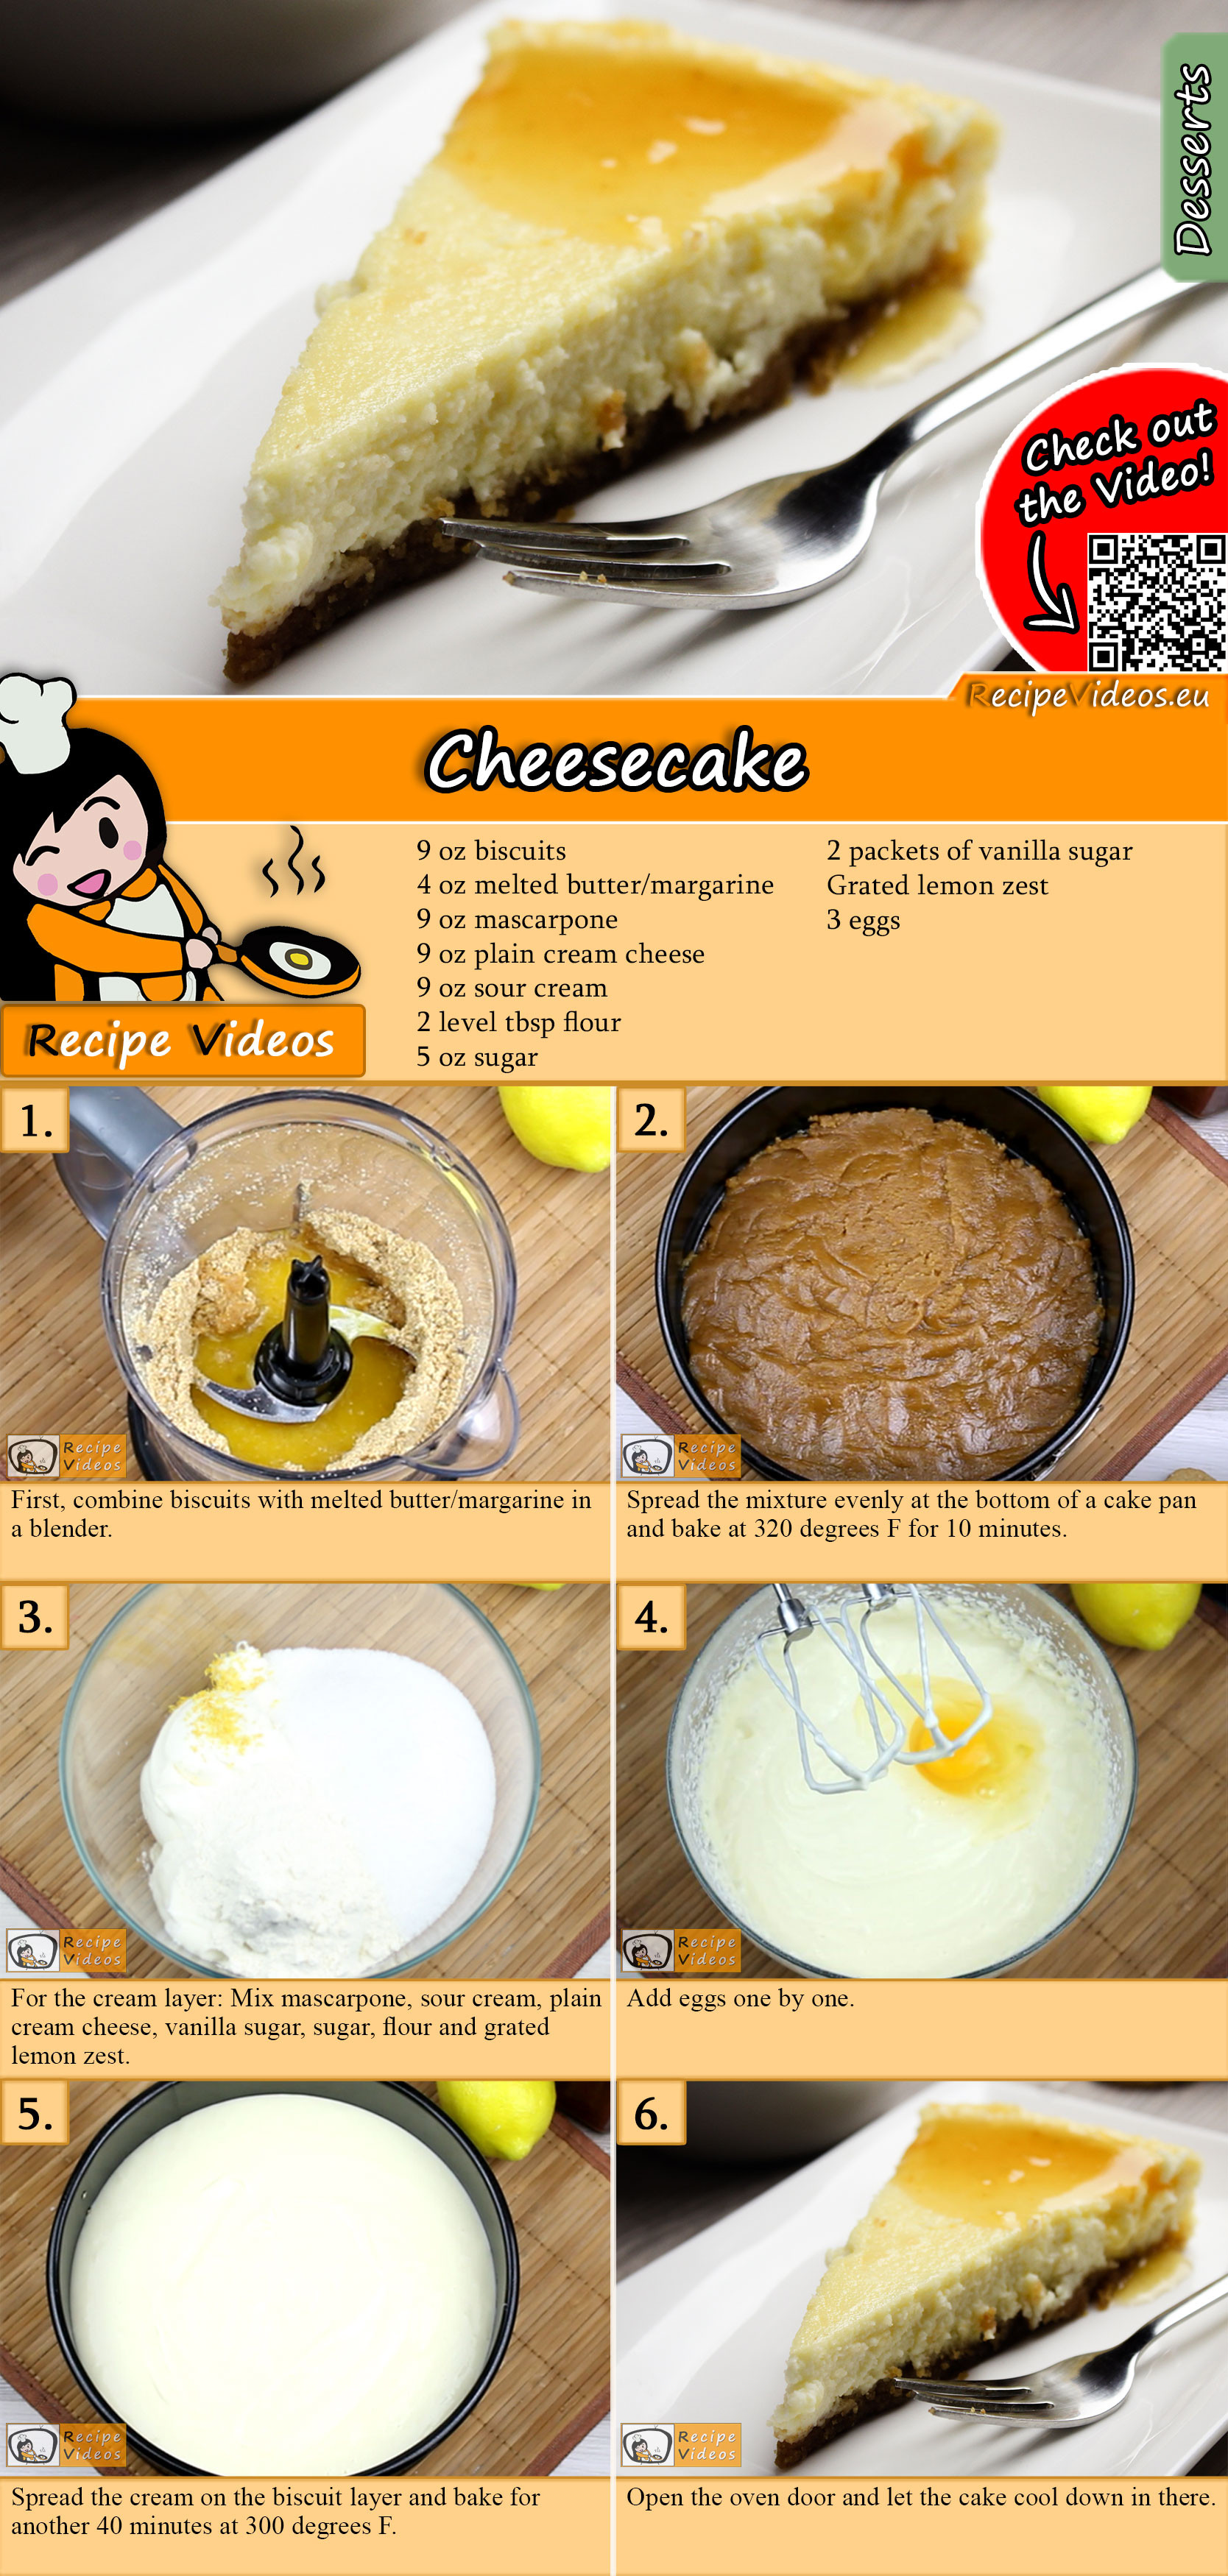 Cheesecake recipe with video